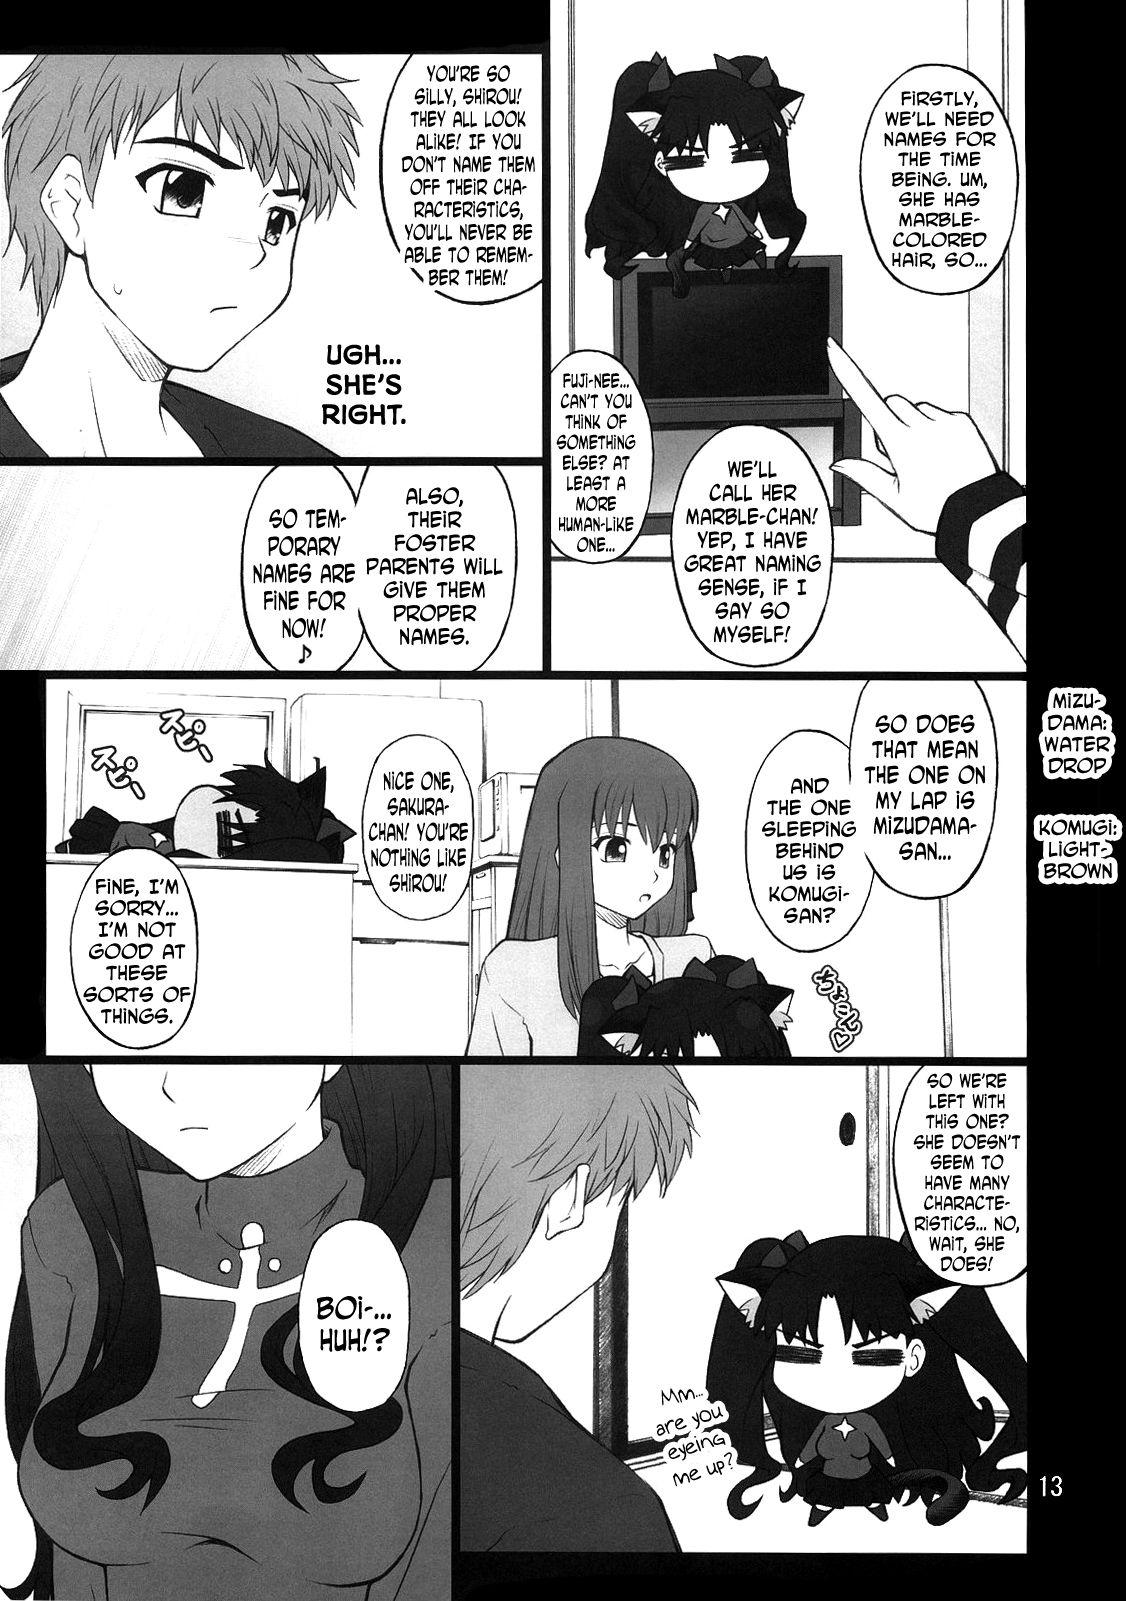 Young Tits Grem-Rin 2 - Fate stay night Big Dicks - Page 12